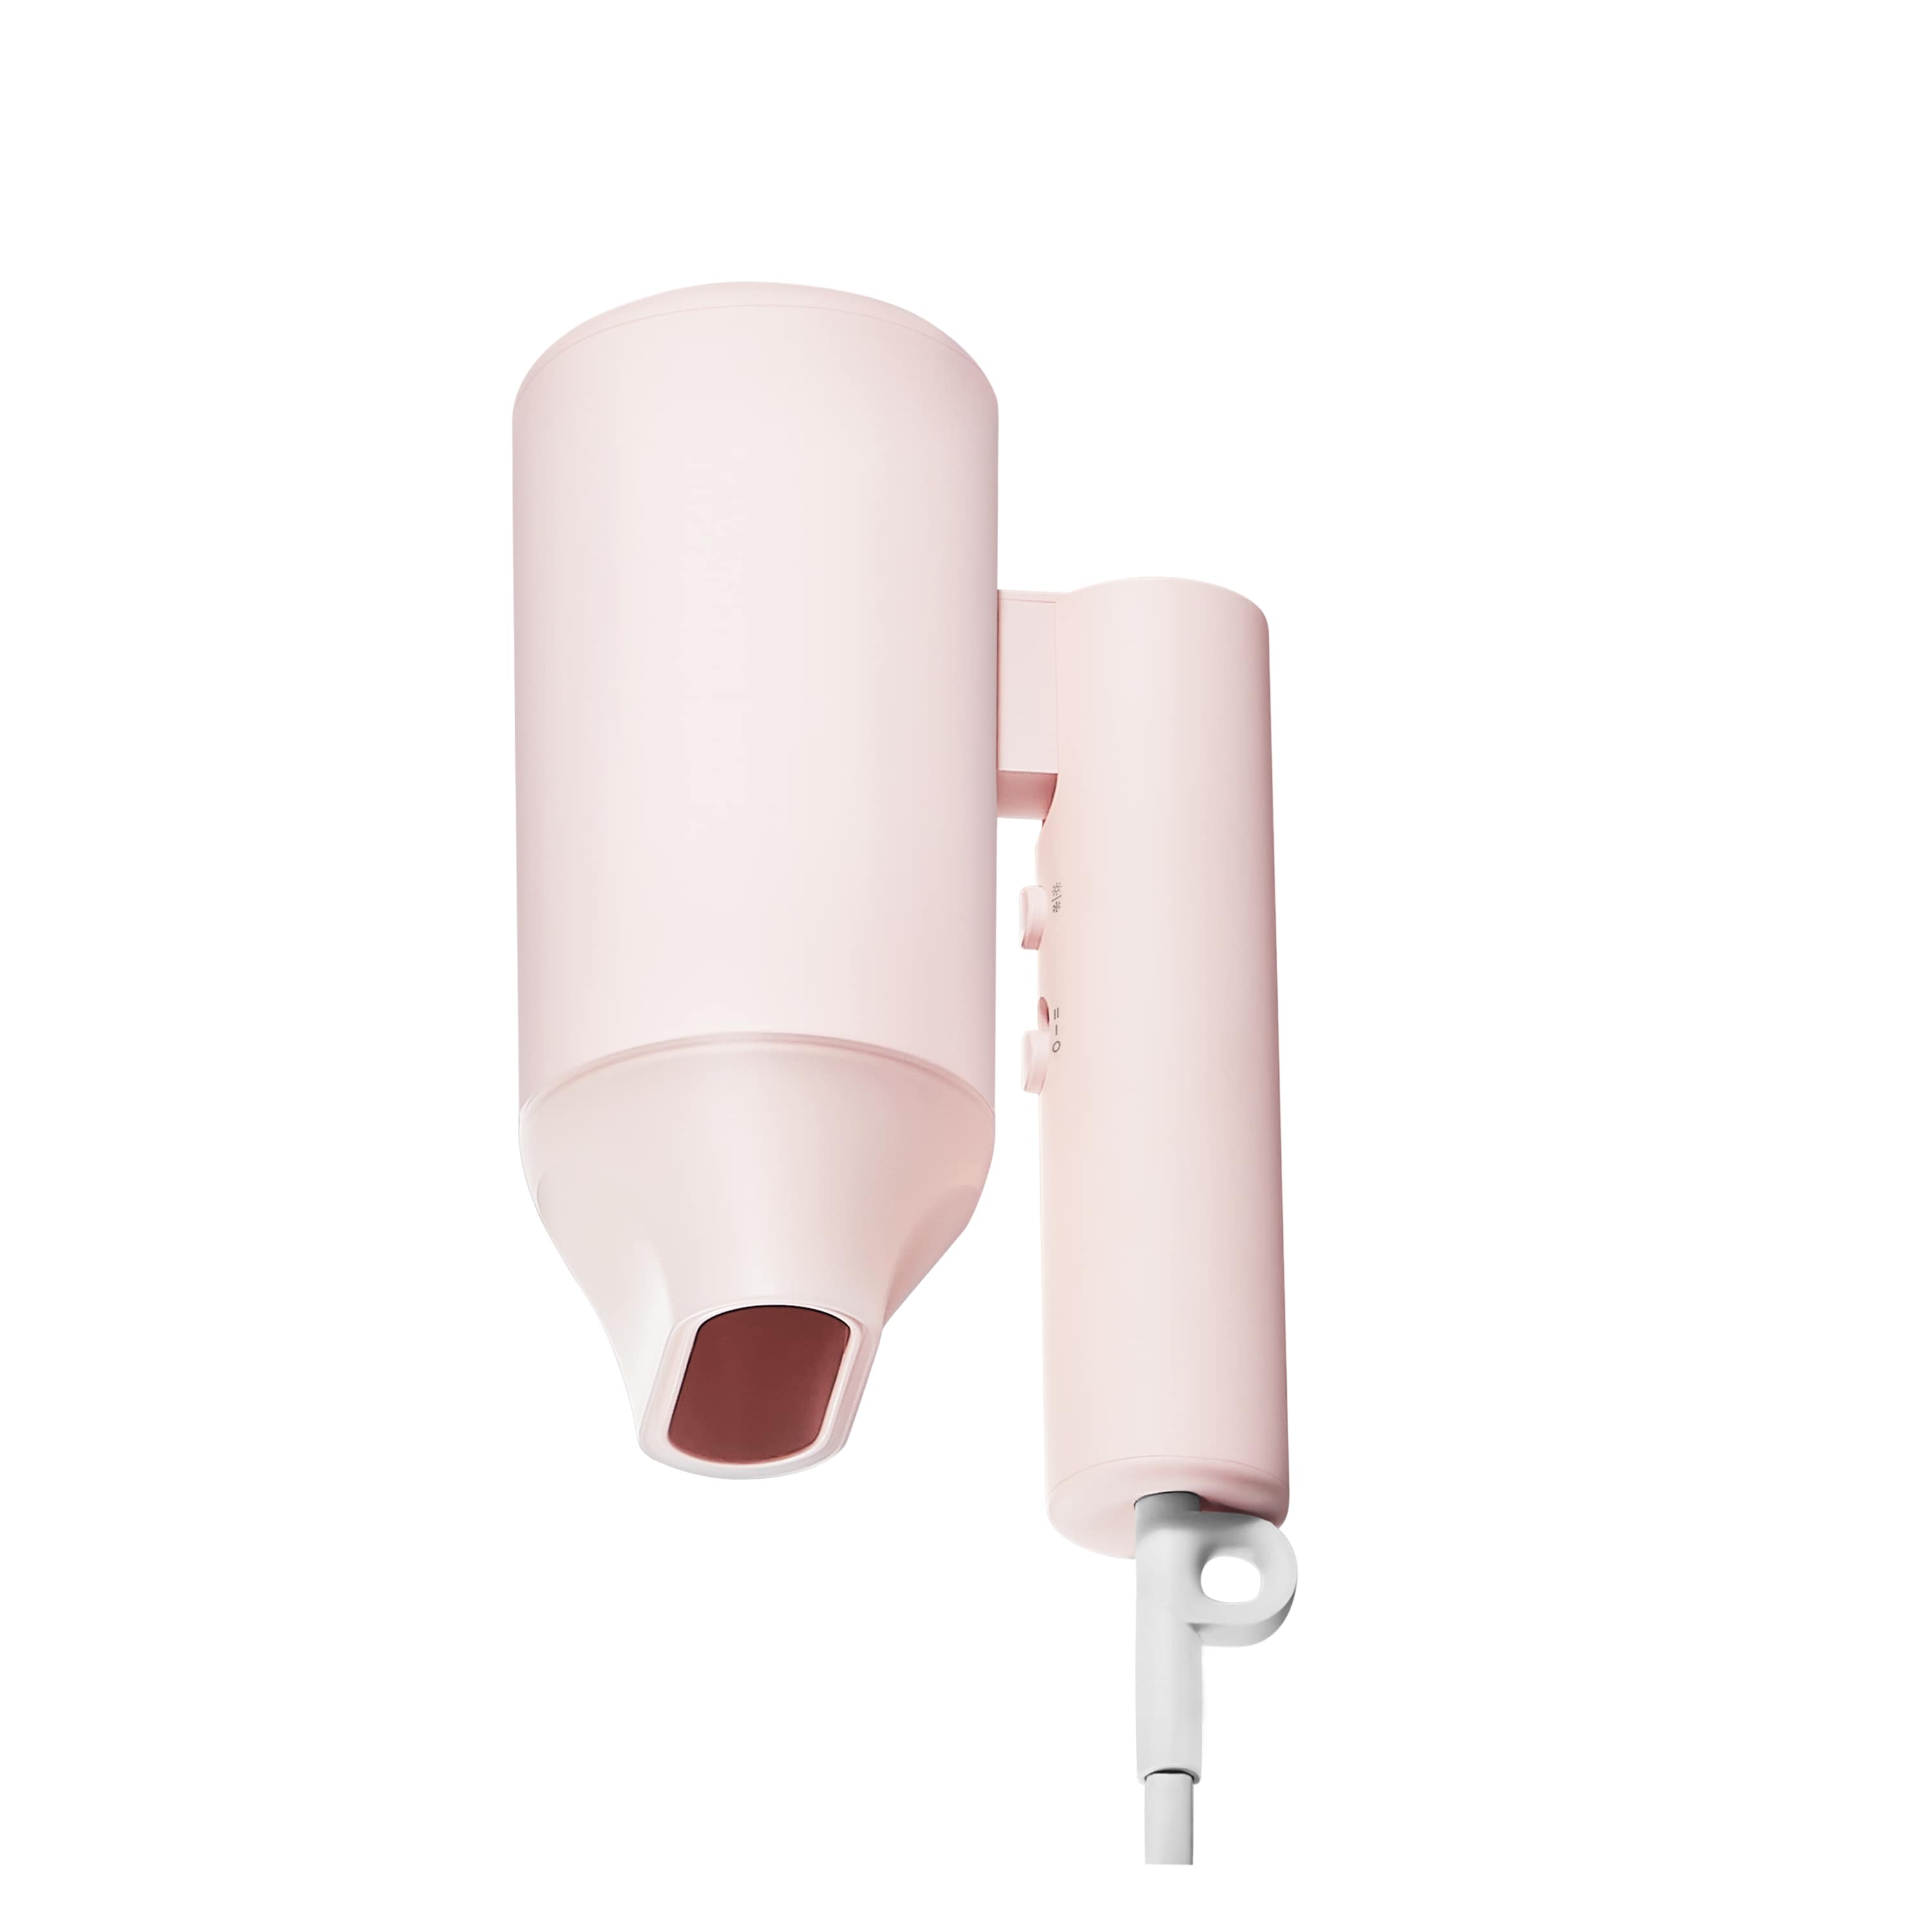 Xiaomi Compact Hair Dryer H101 Pink 